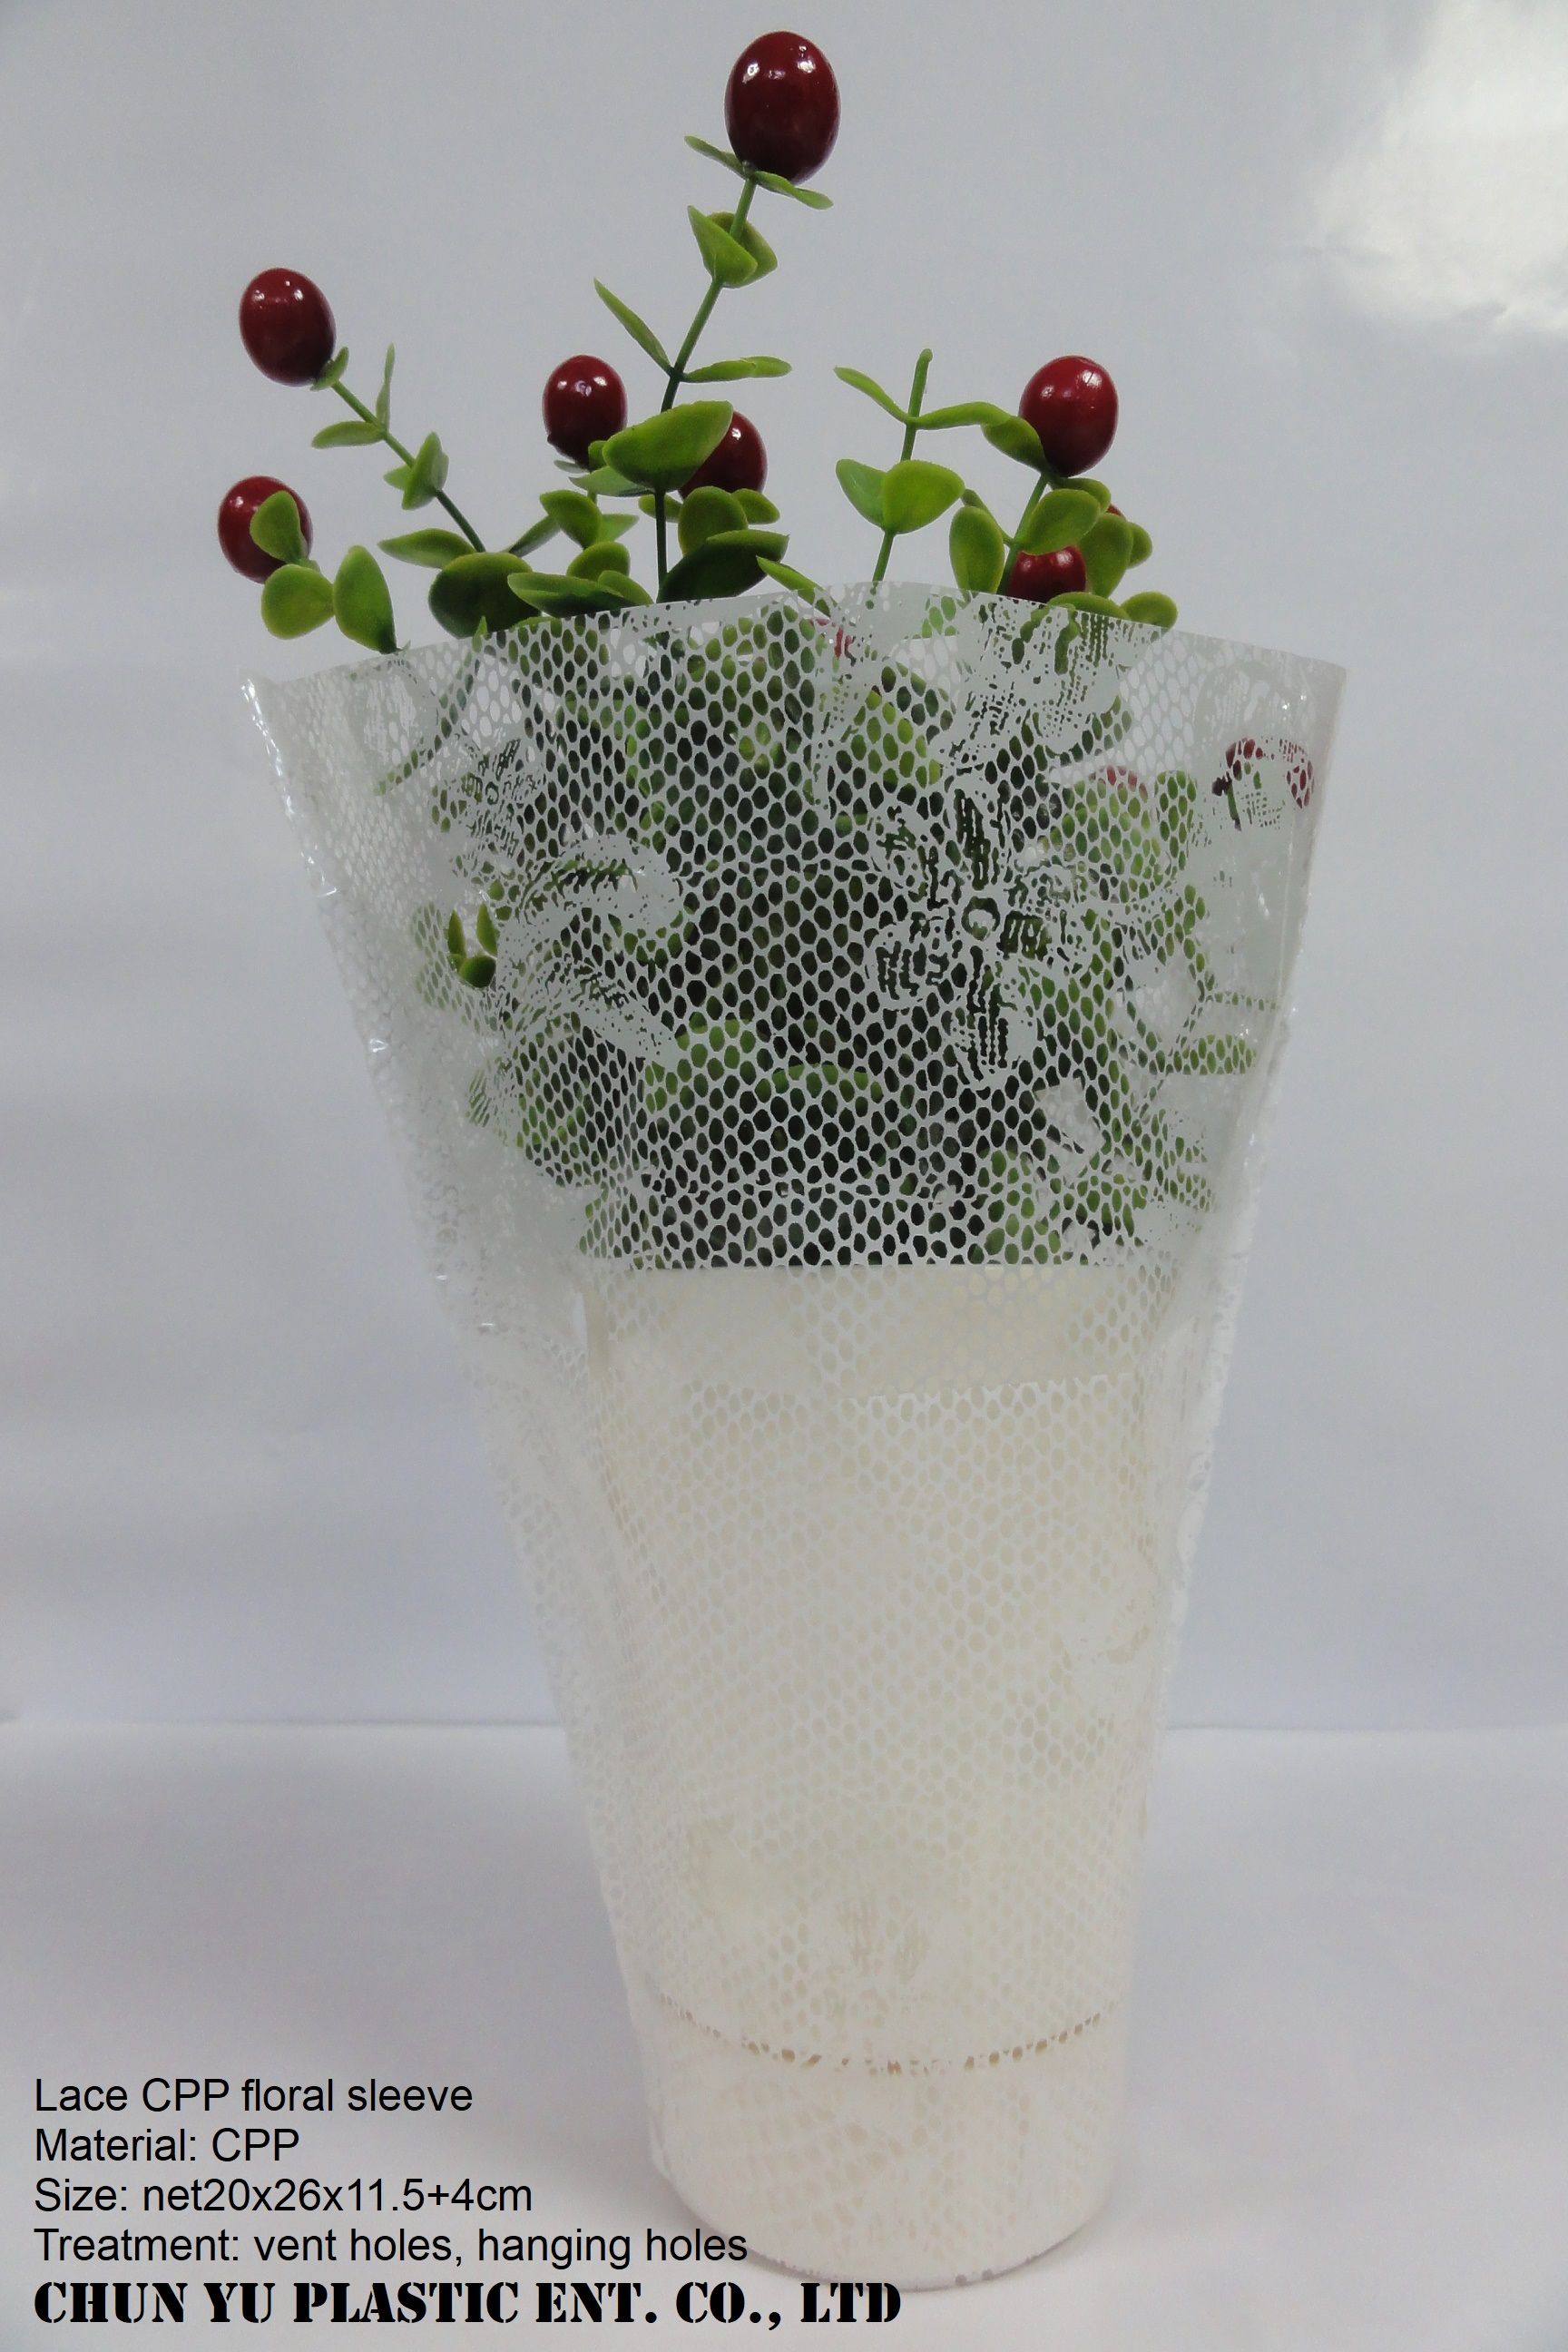 Lace design CPP flower bag for potted plants and cut flower bouquets.